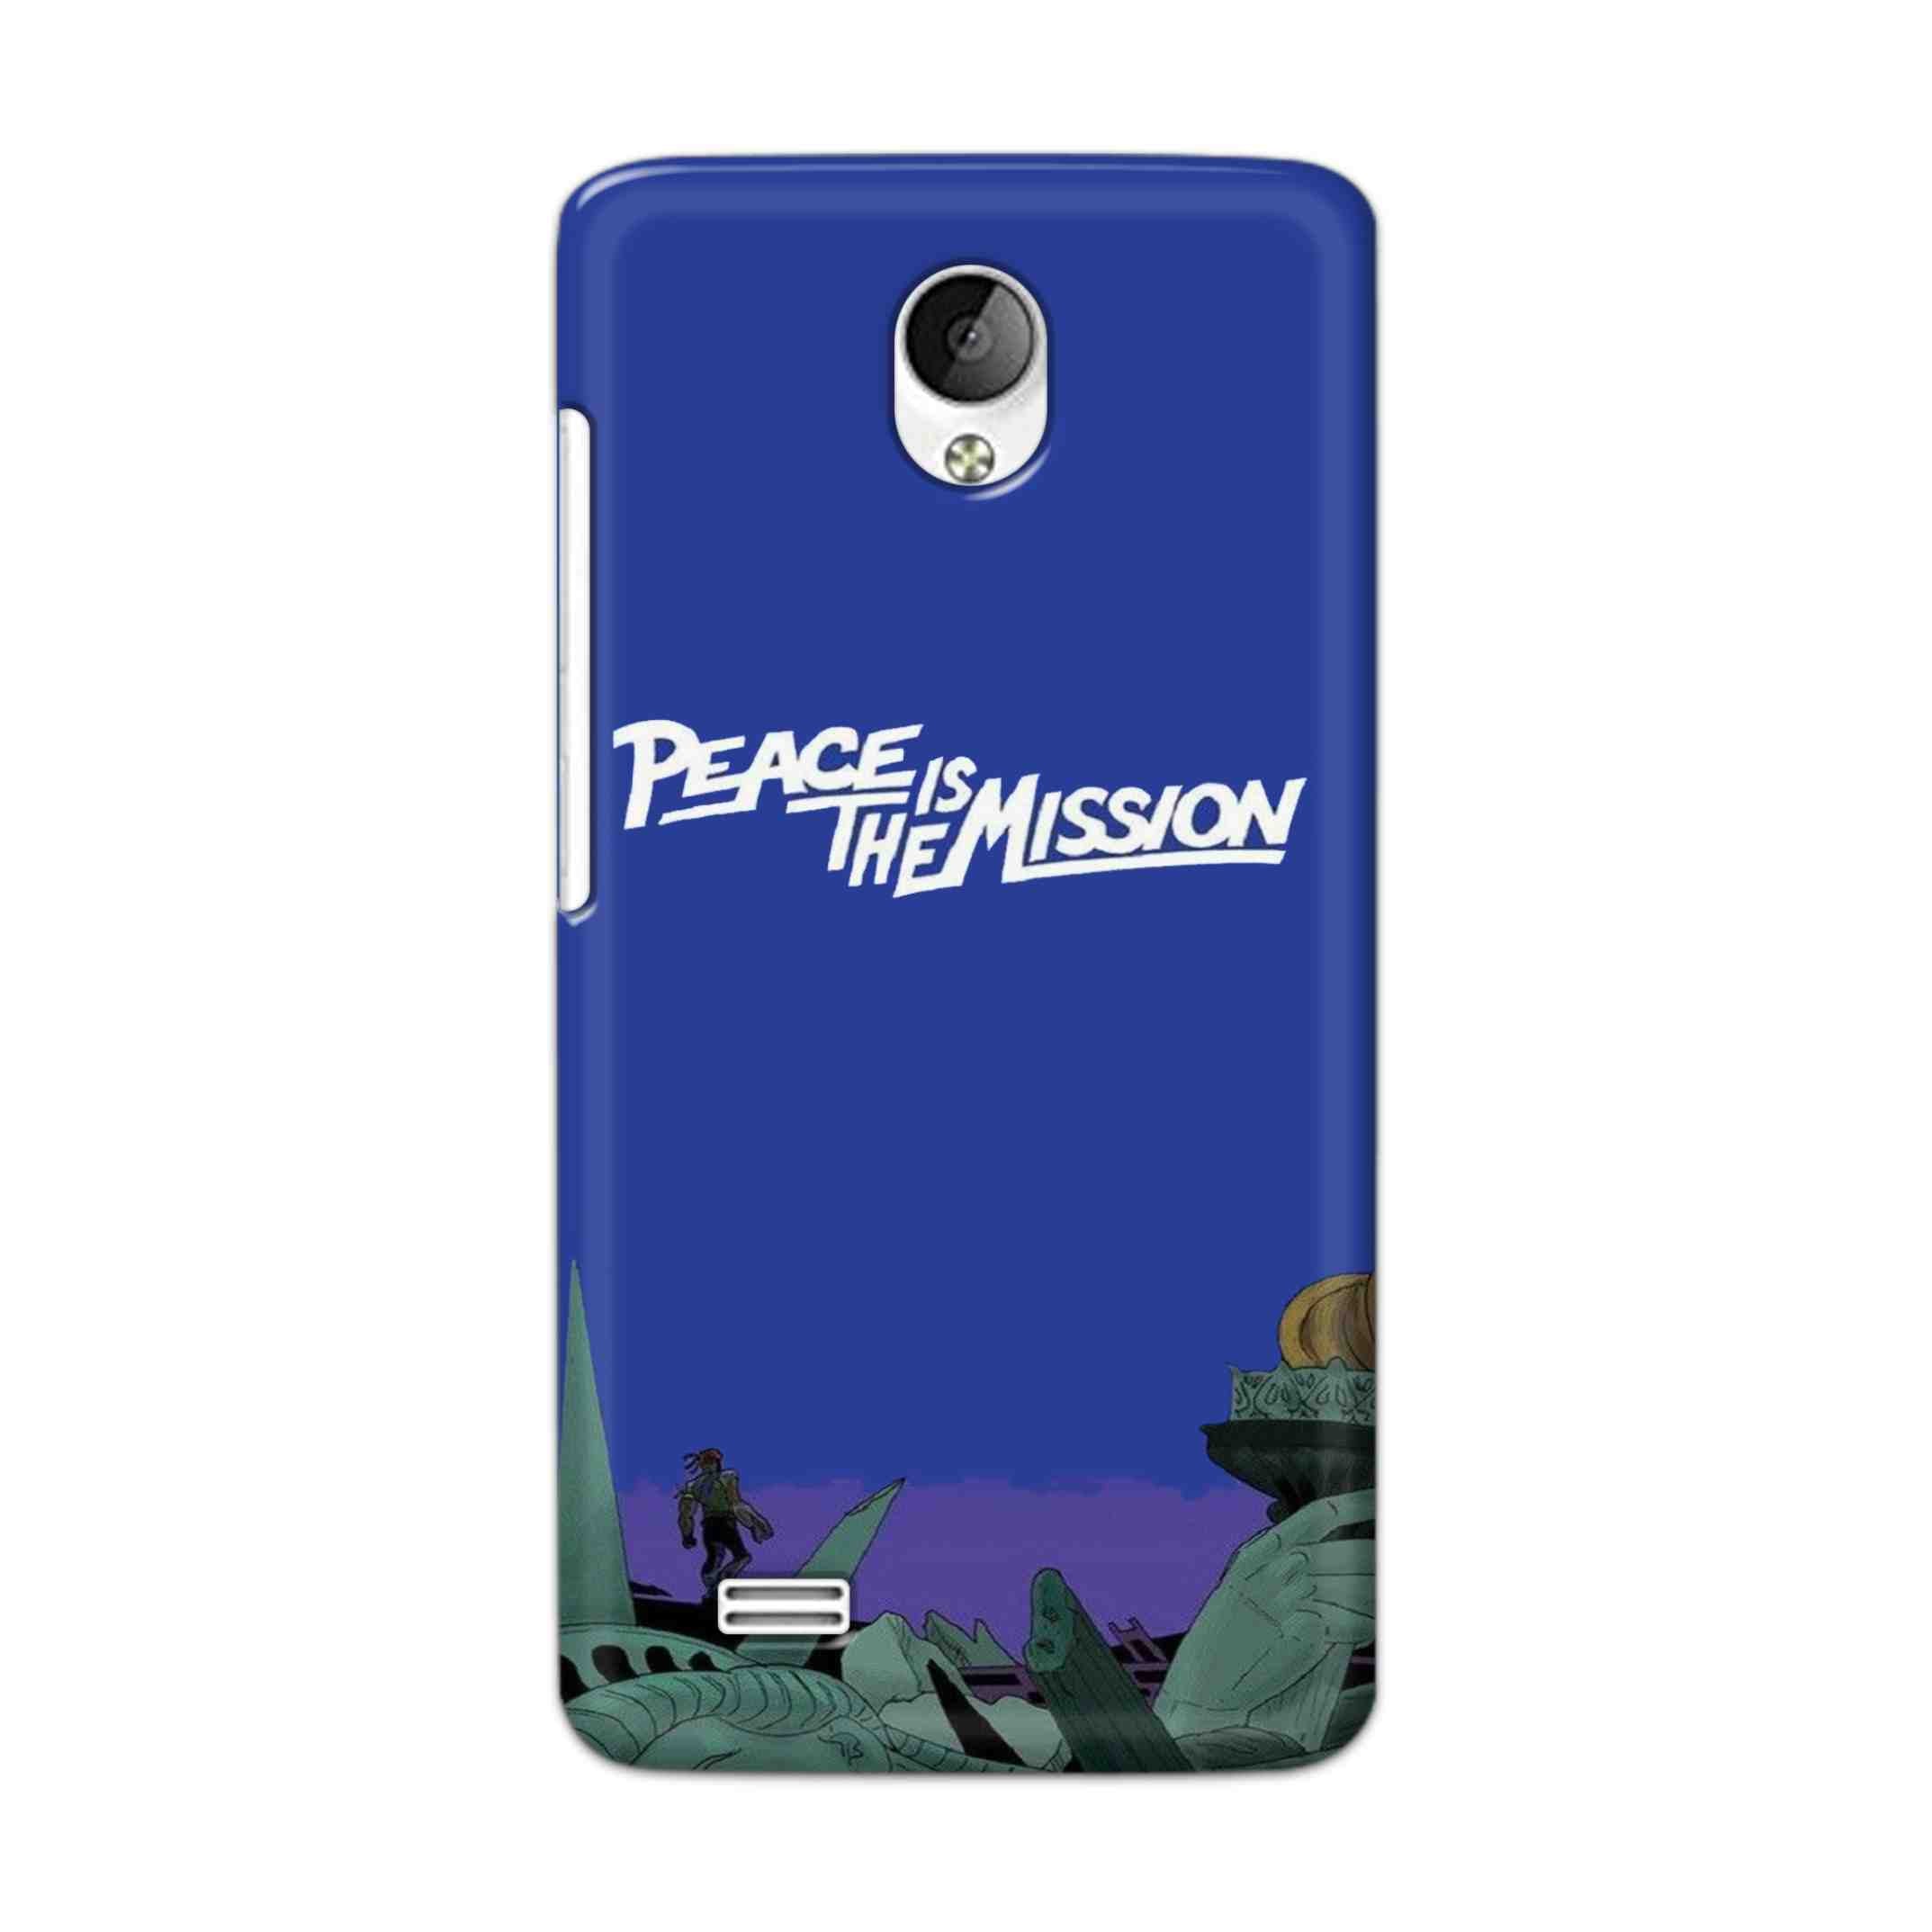 Buy Peace Is The Misson Hard Back Mobile Phone Case Cover For Vivo Y21 / Vivo Y21L Online